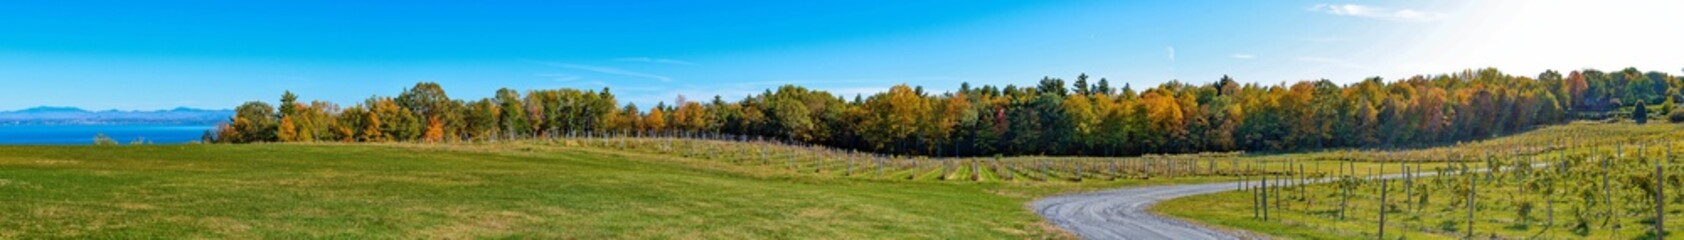 Panoramic view of a vineyard in New-York state in late fall